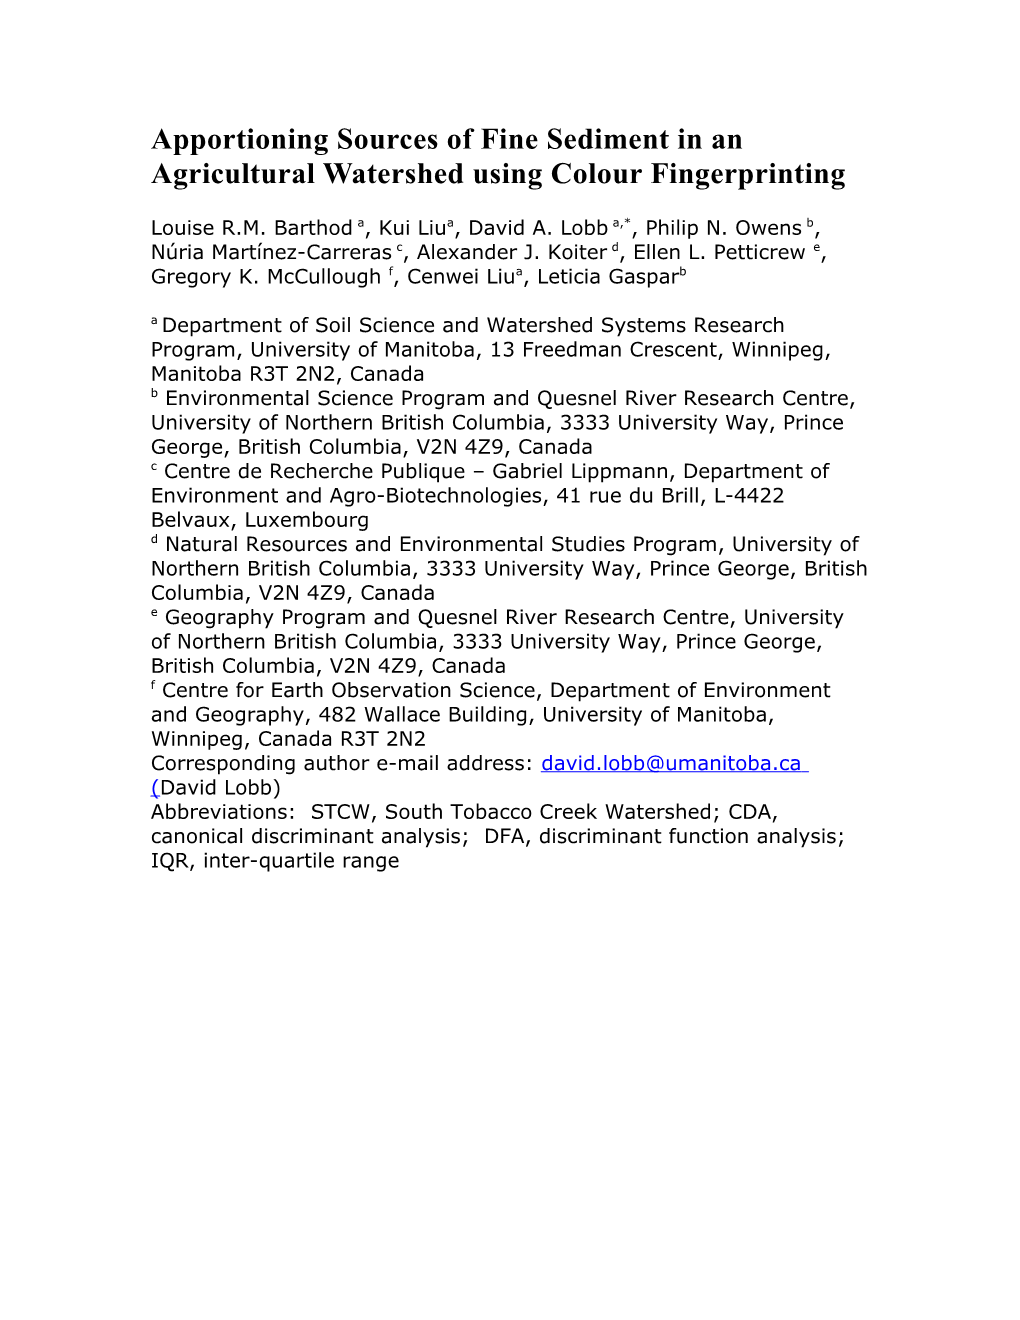 Apportioning Sources of Fine Sediment in an Agricultural Watershed Using Colour Fingerprinting